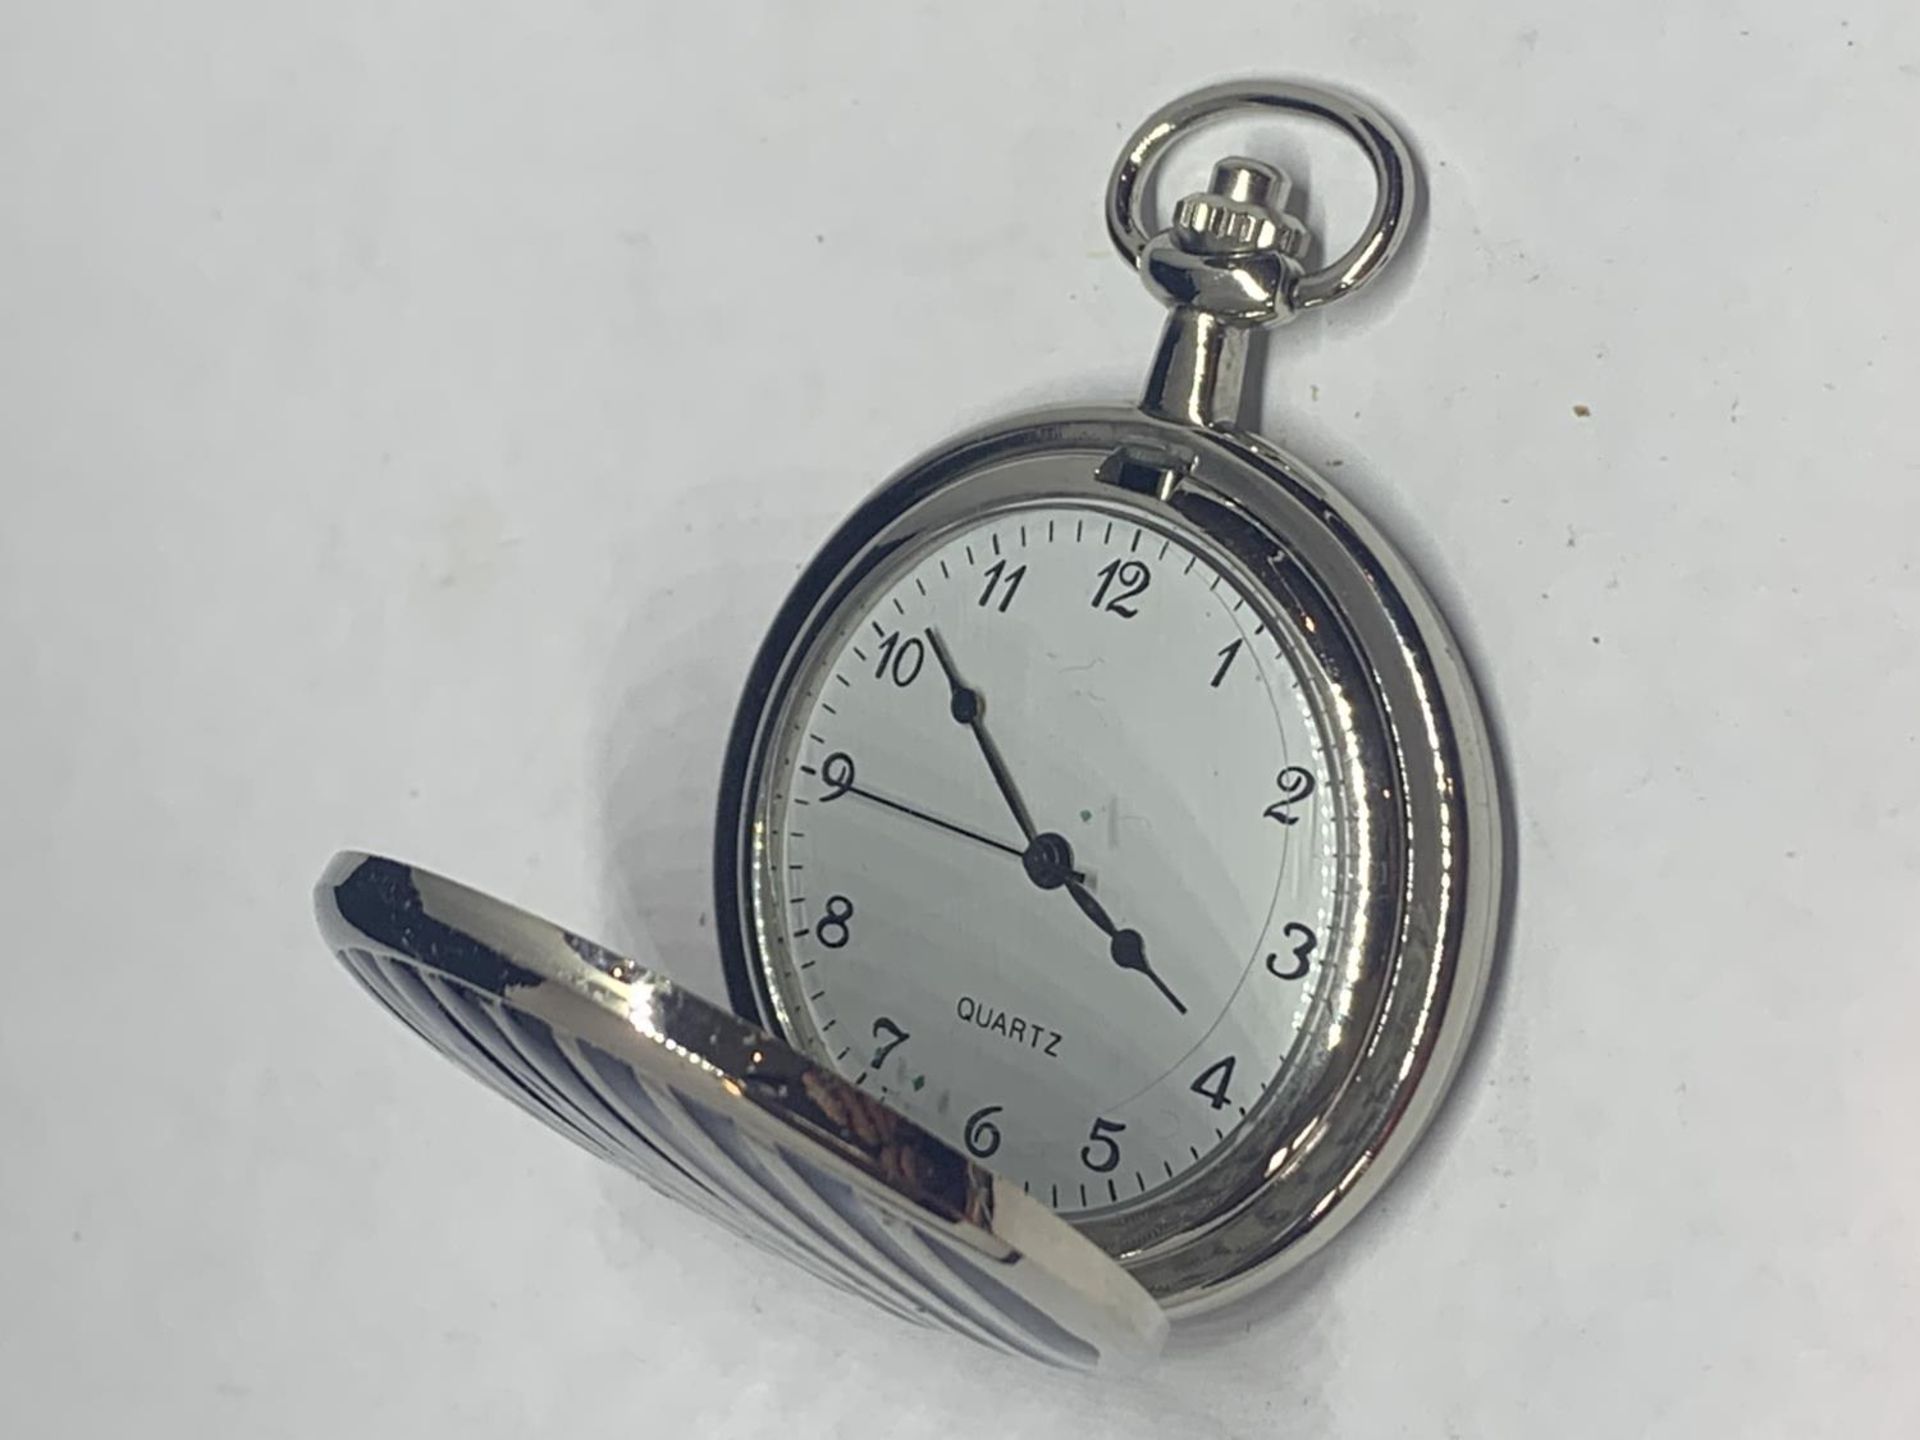 A WHITE METAL POCKET WATCH WITH BLUE ENAMEL STRIPES - Image 3 of 3